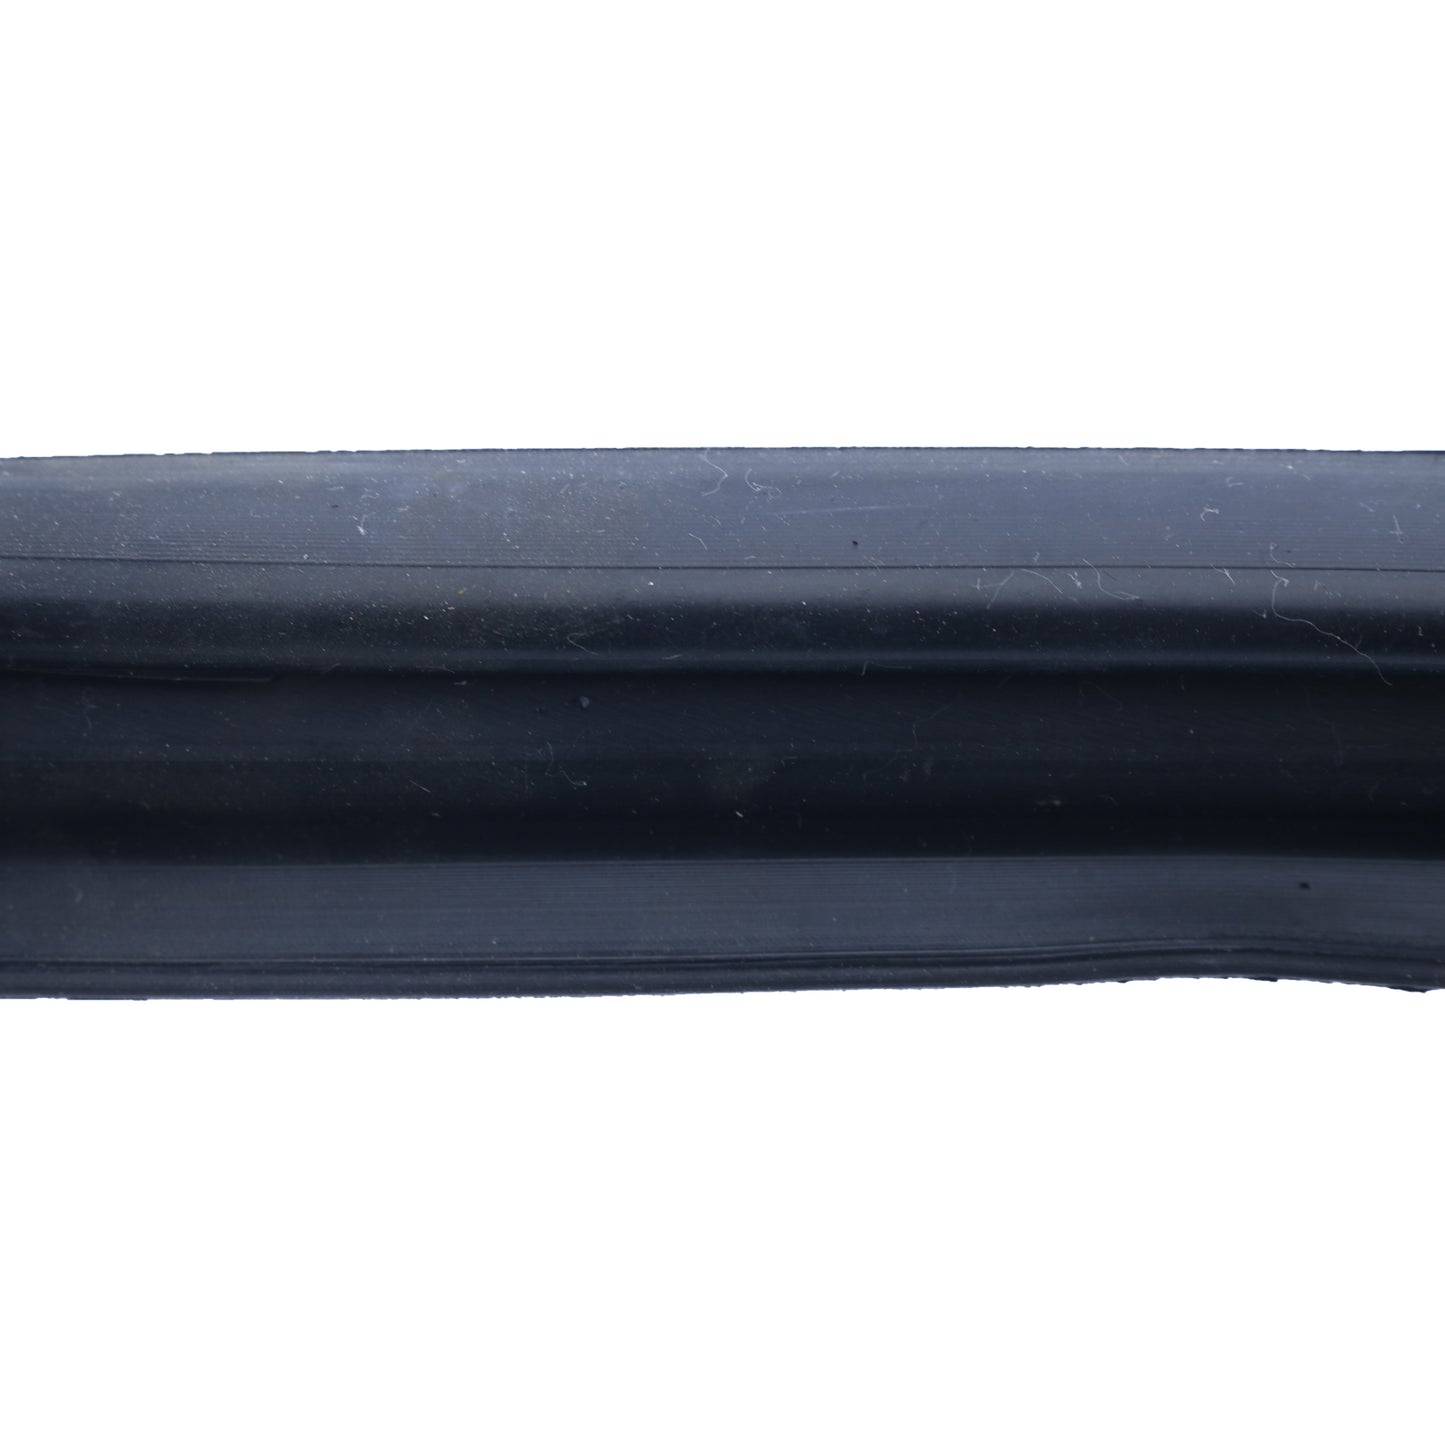 New 7165265 Top Window Rubber Seal Compatible with 751 753 763 773 863 873 883 963 T110 T140 T180 T190 T200 T250 T300 T320